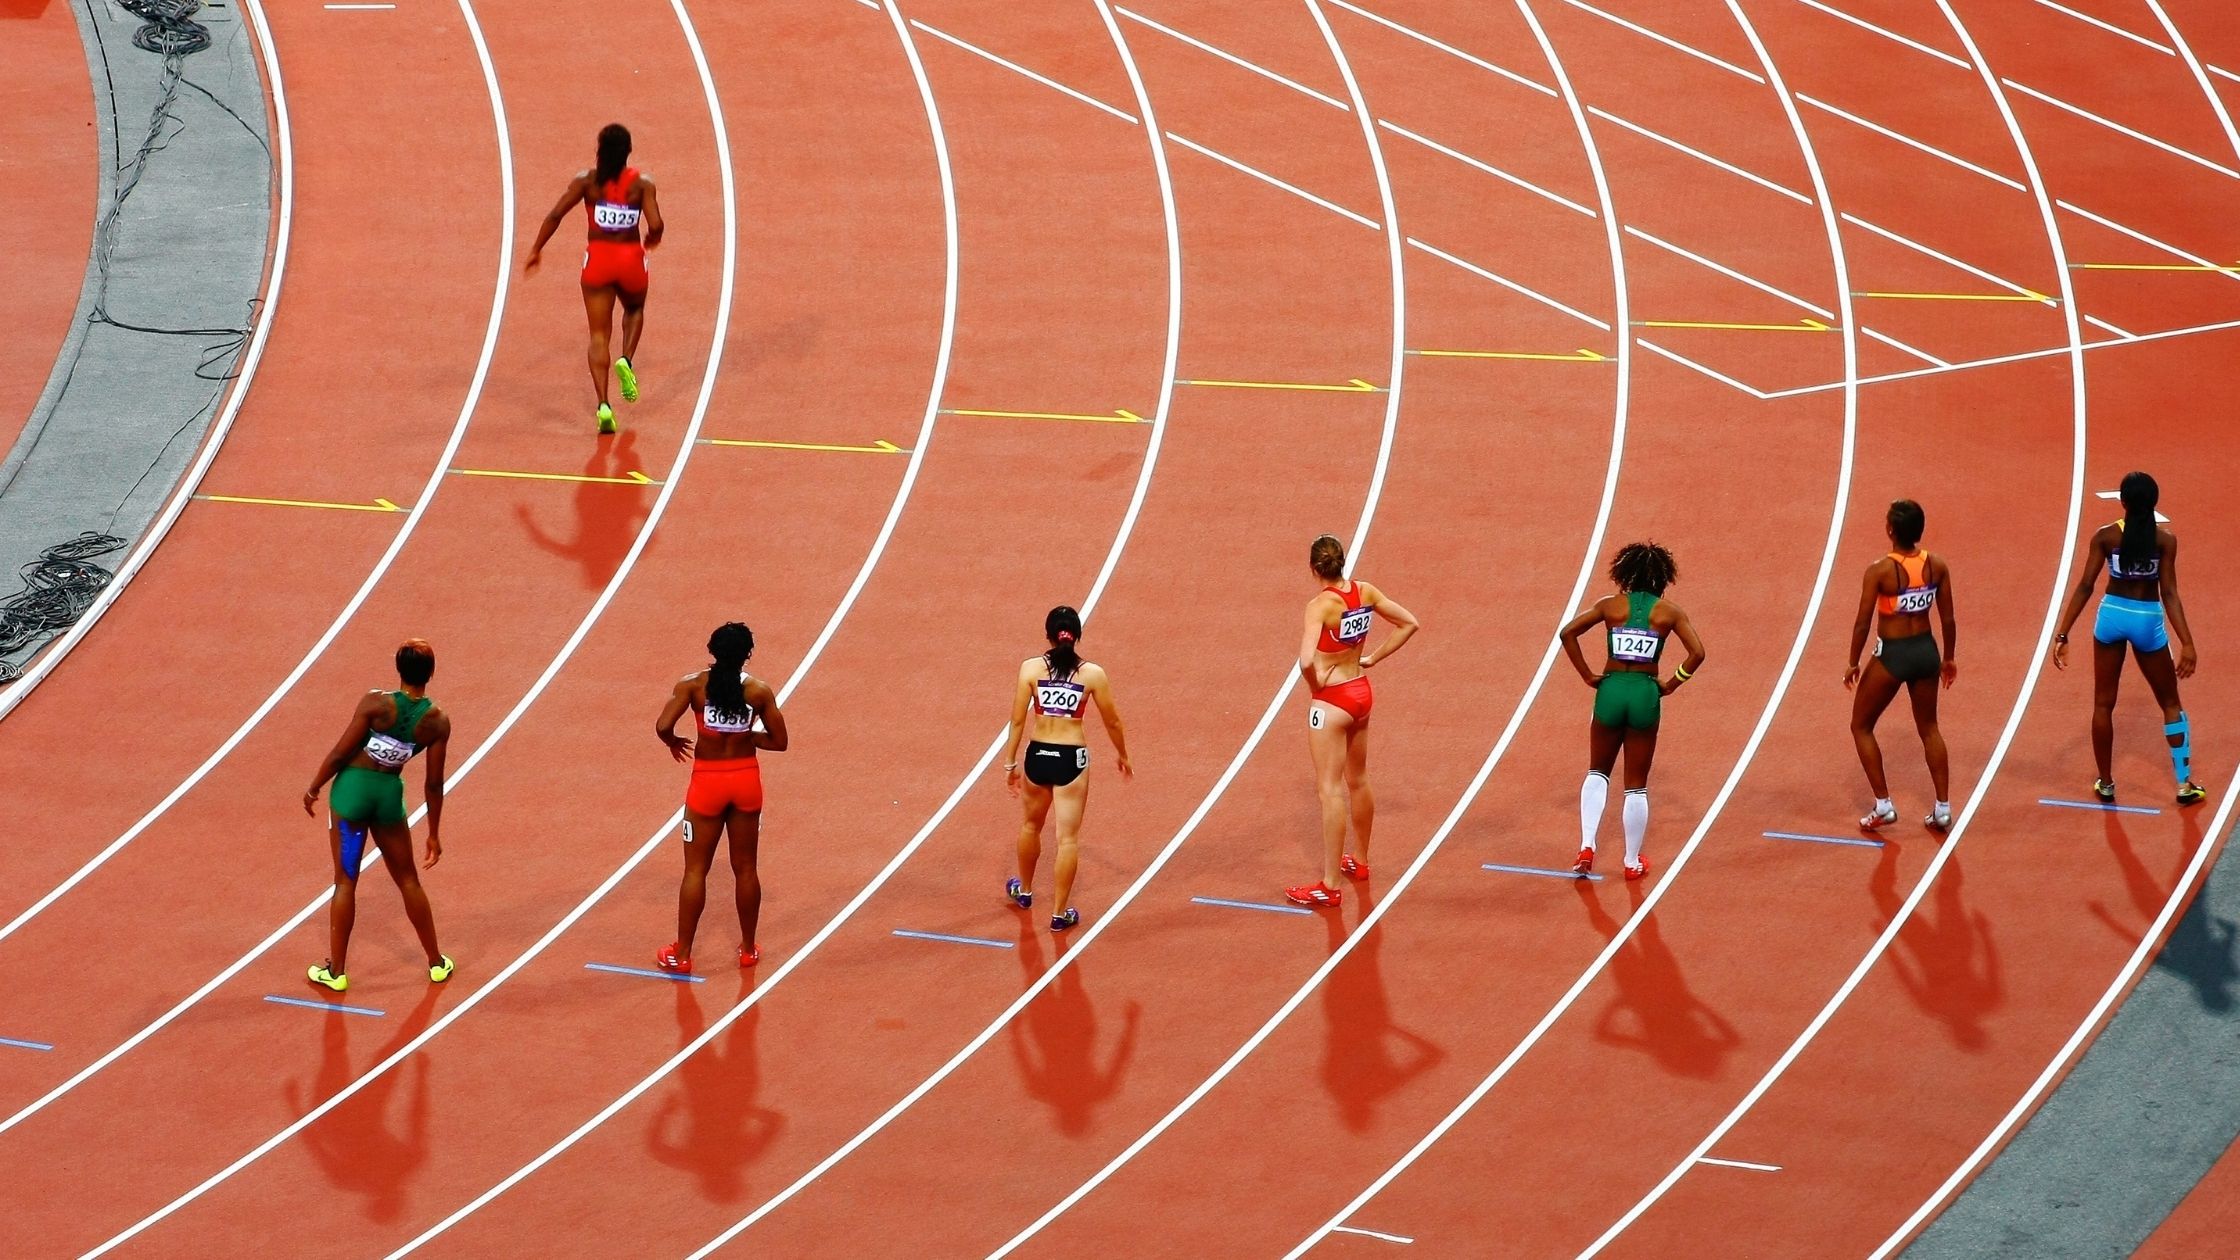 Athletes are seen standing on the start line of a race.